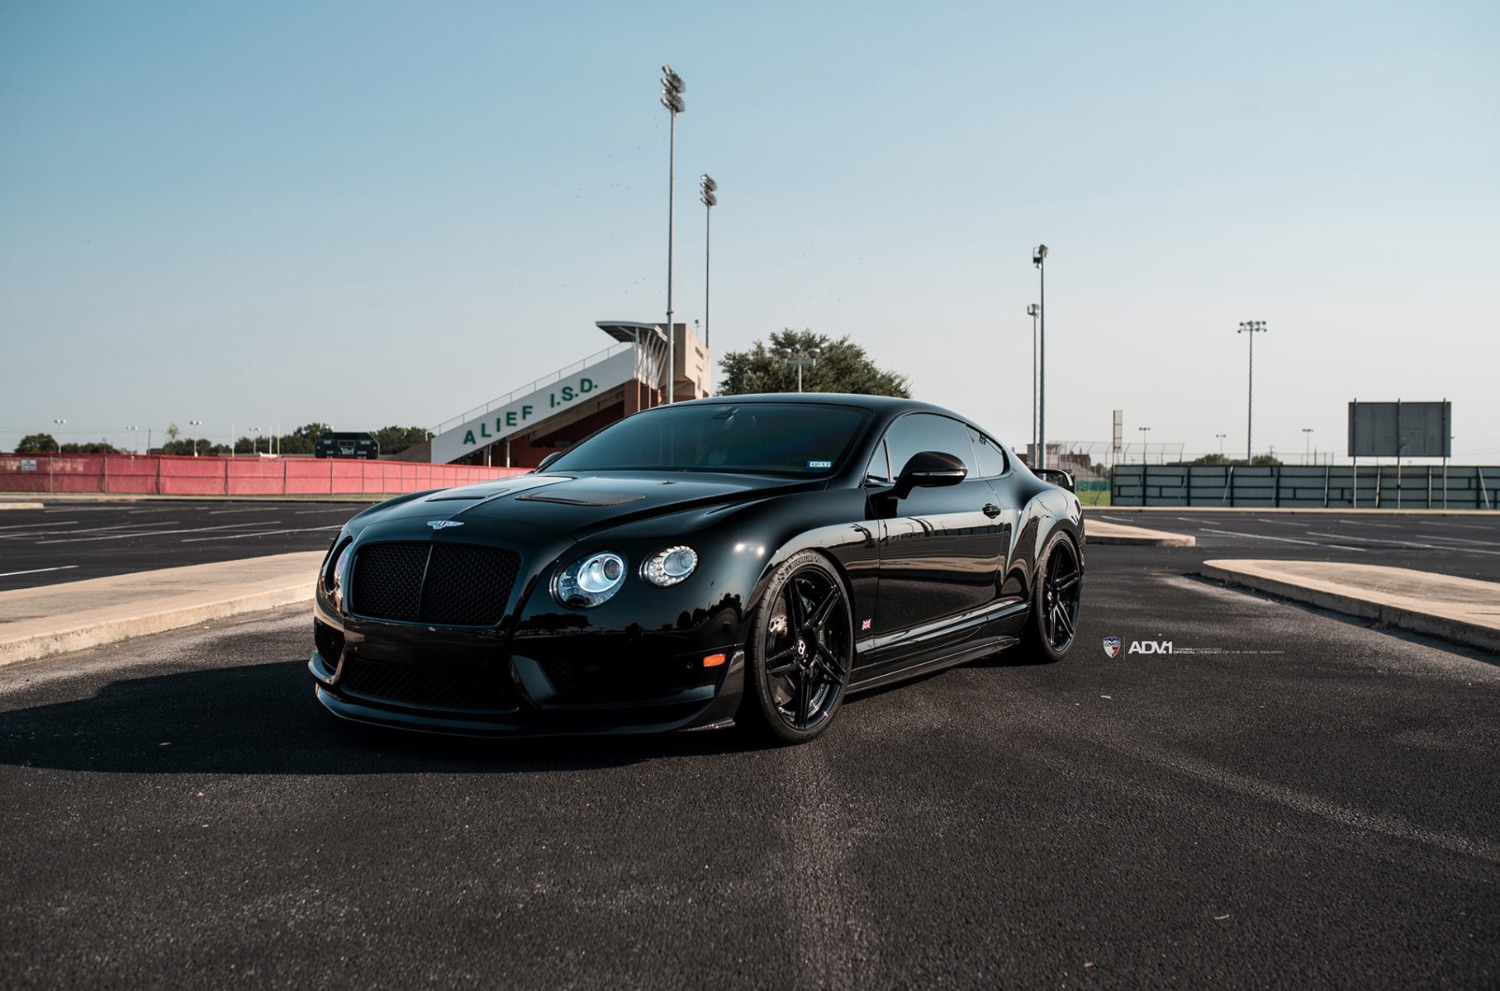 black-murdered-out-bentley-gt3r-continental-rims-houston-luxury-car-l